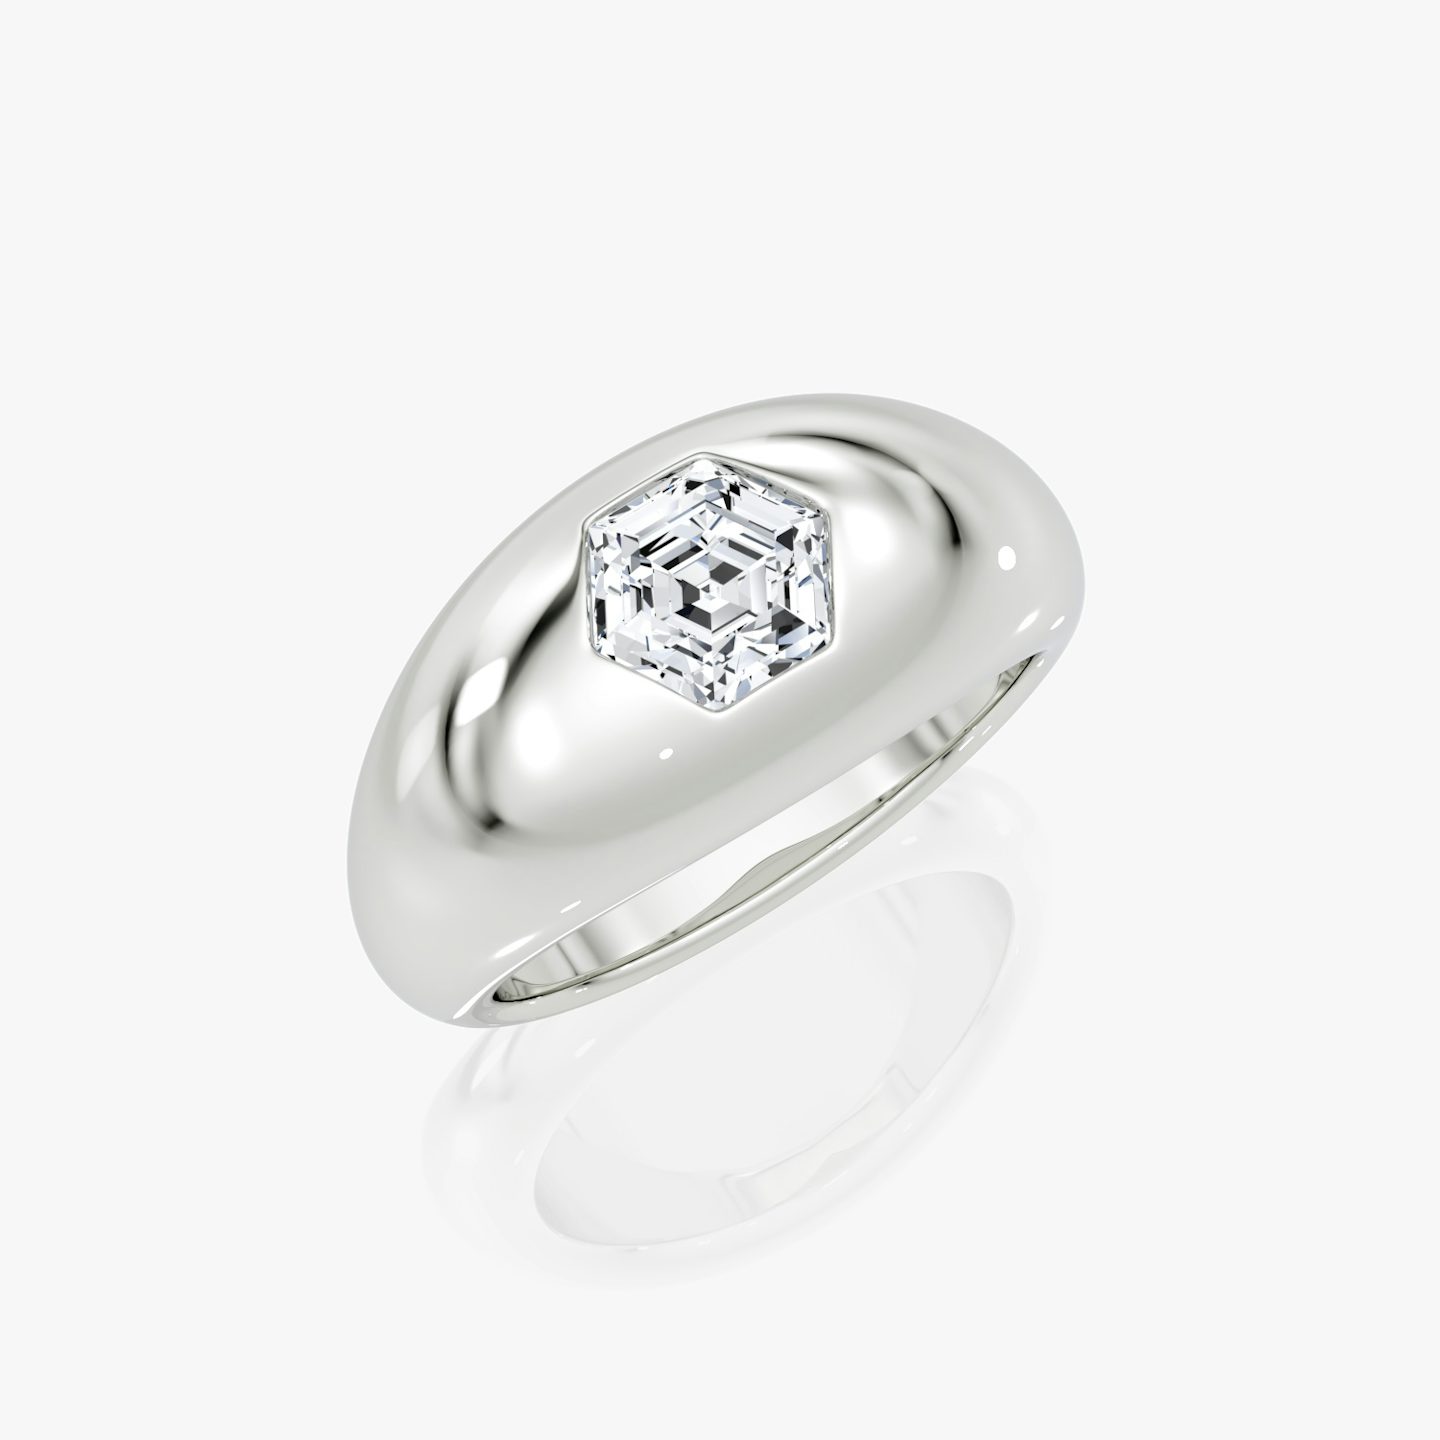 Bague Dome | Hexagone | 14k | Or blanc 18 carats